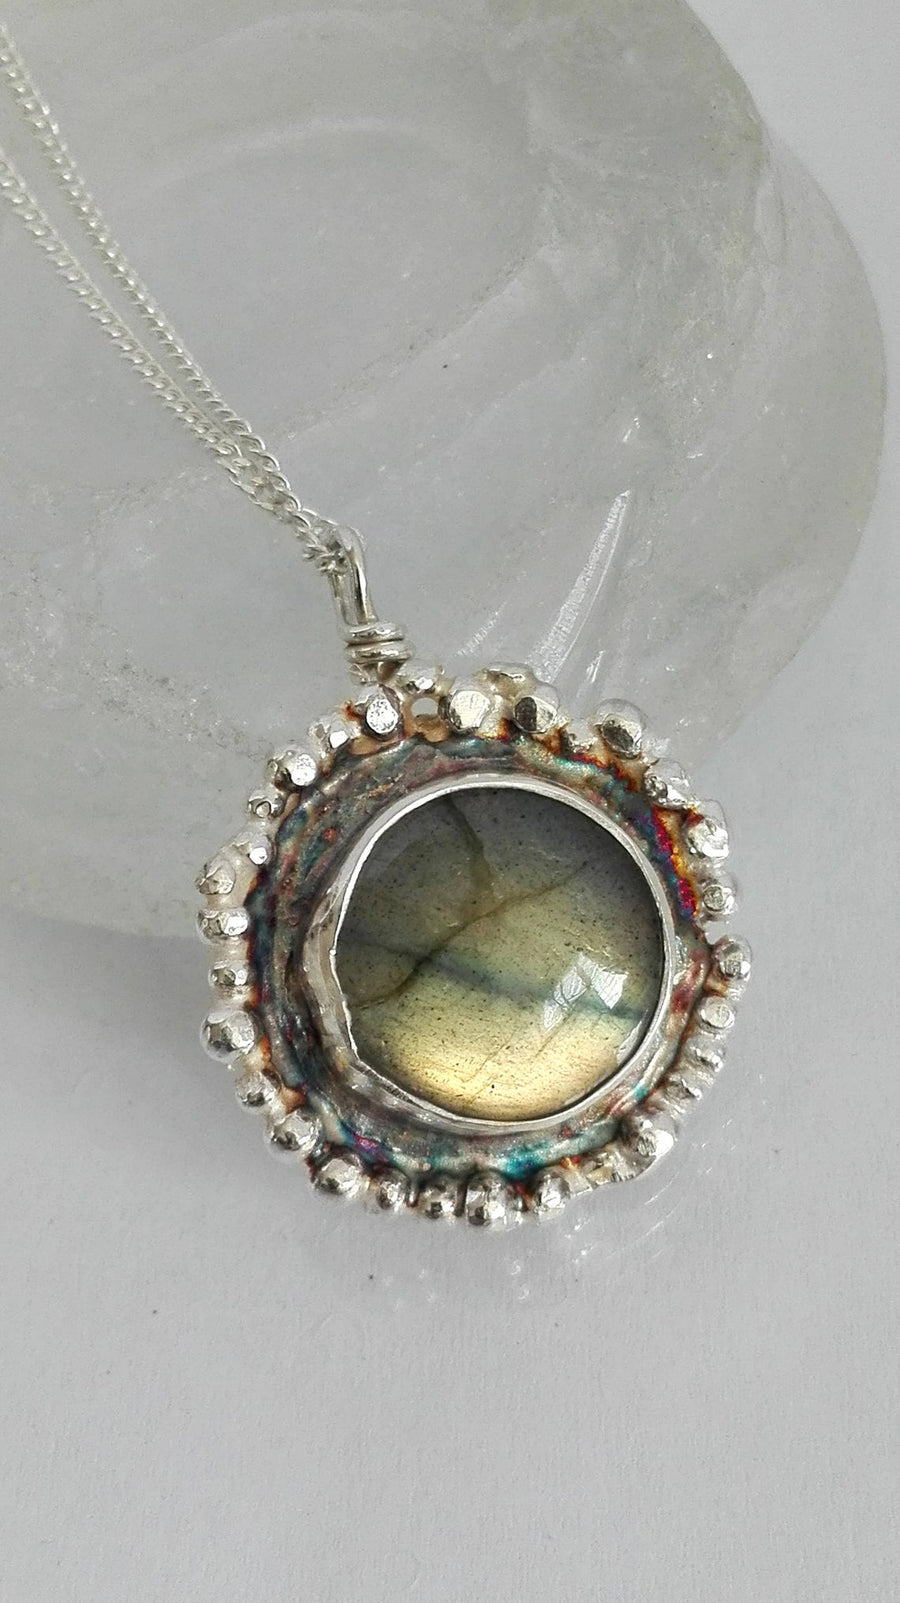 Sterling Chain and Labradorite Pendant Necklace